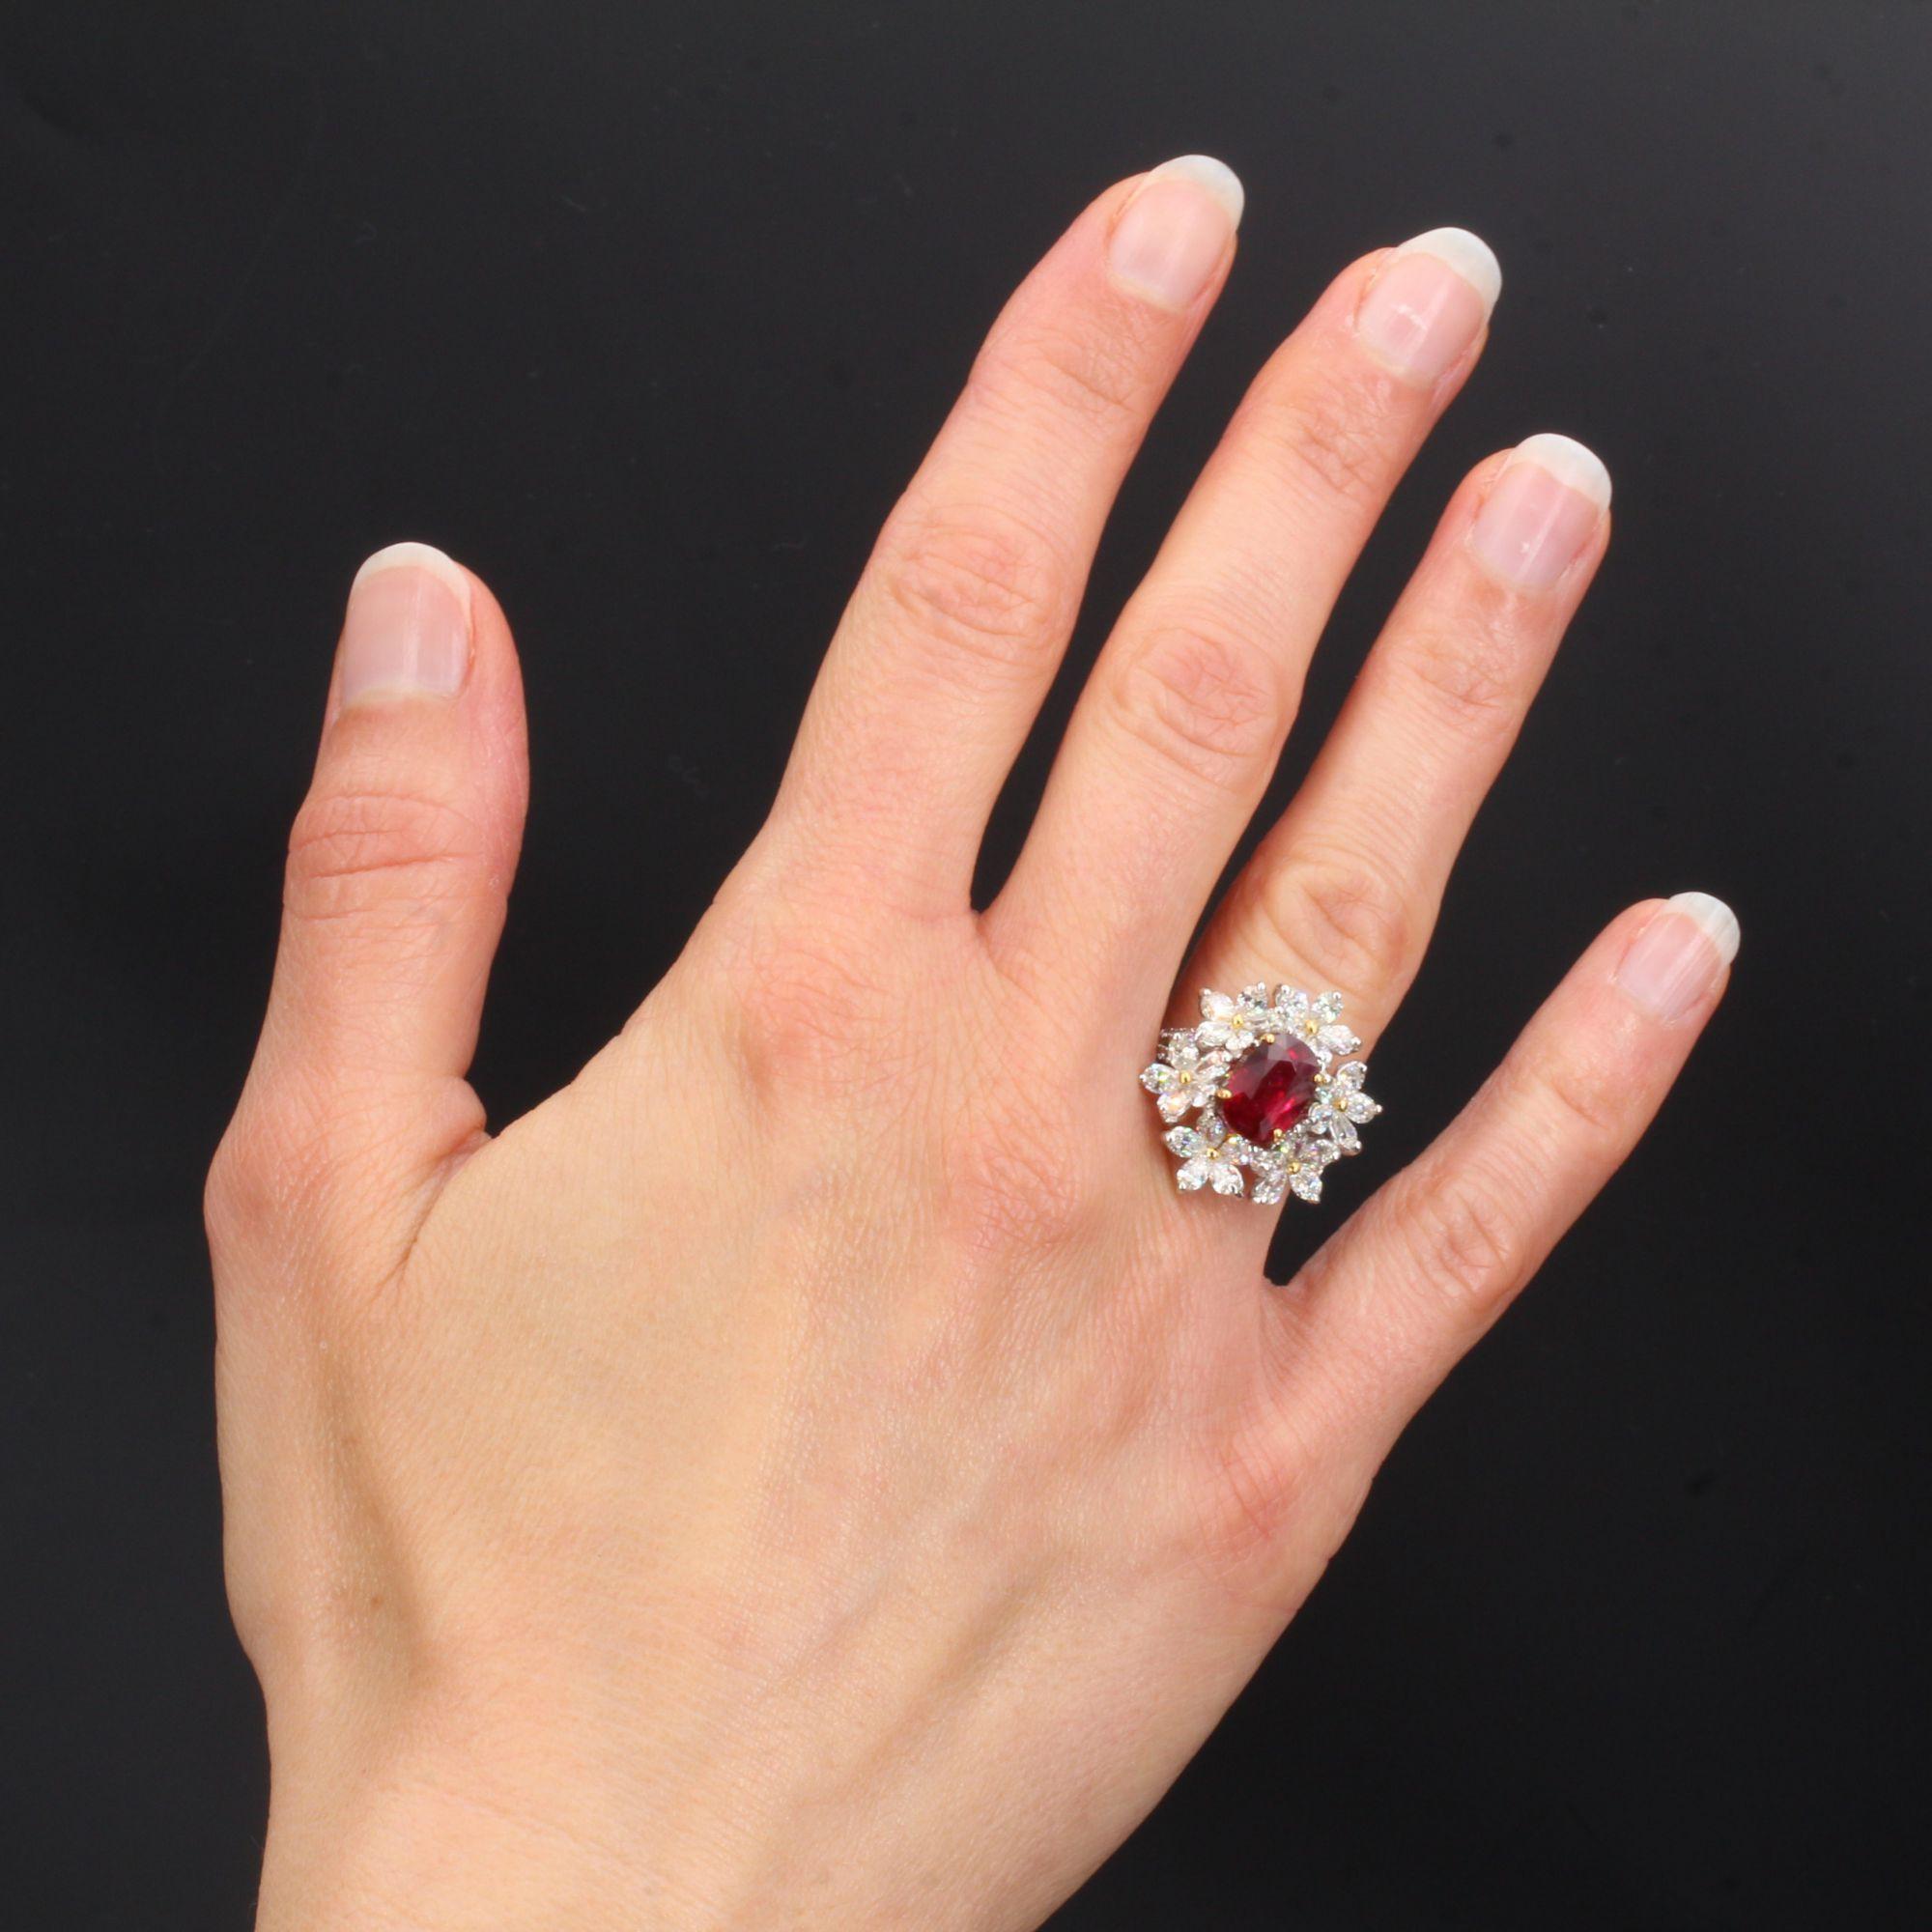 Ring in 18 karat white gold, eagle head hallmark.
This sublime ruby jewel ring is set with 4 claws on its top of a cushion- cut ruby certified 